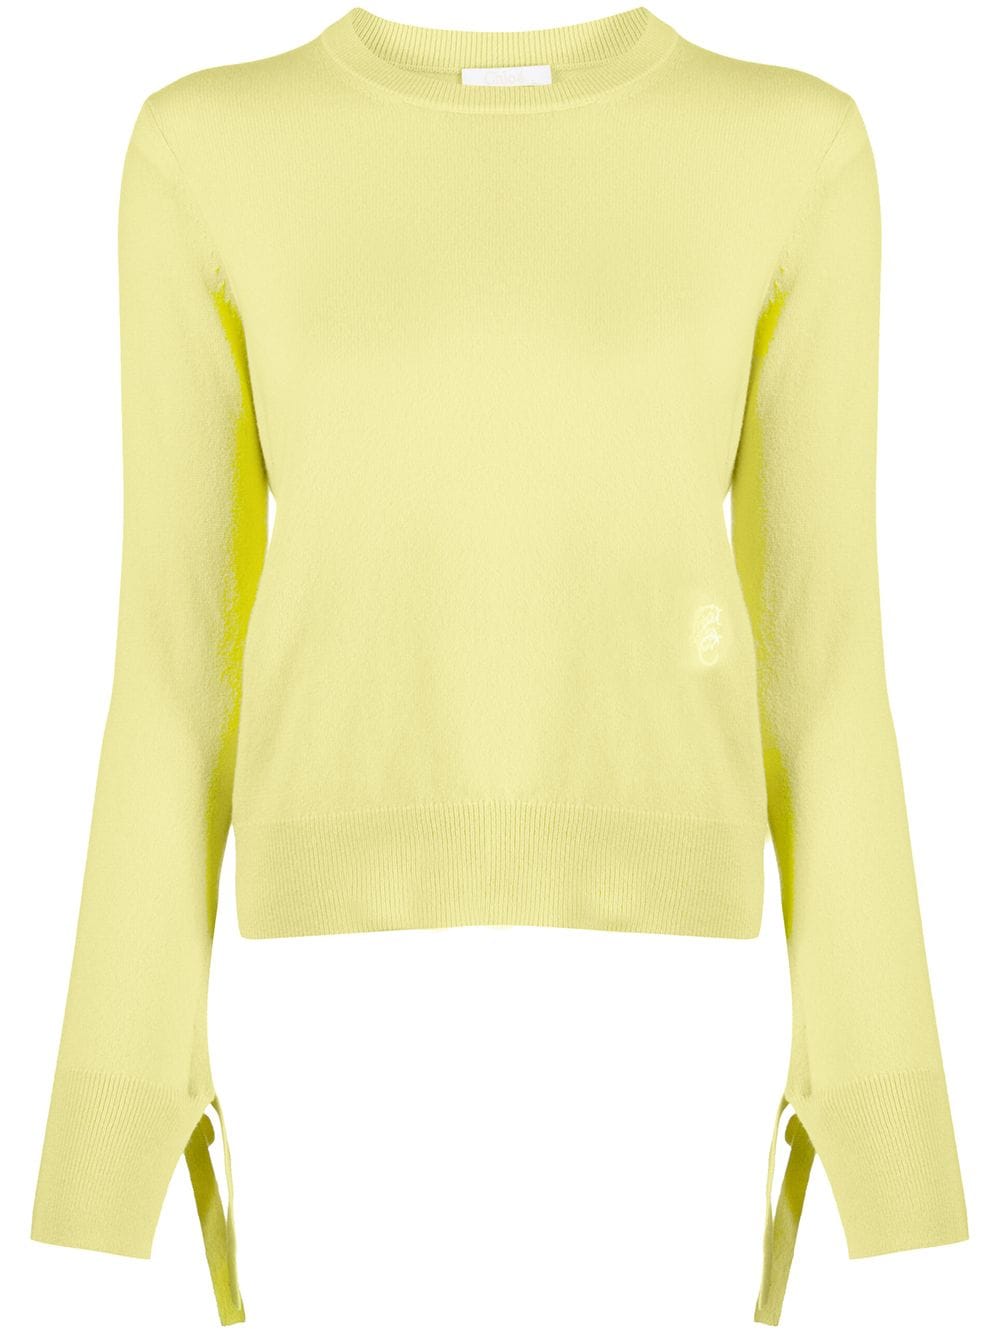 Chloé Iconic Crewneck Jumper In Yellow